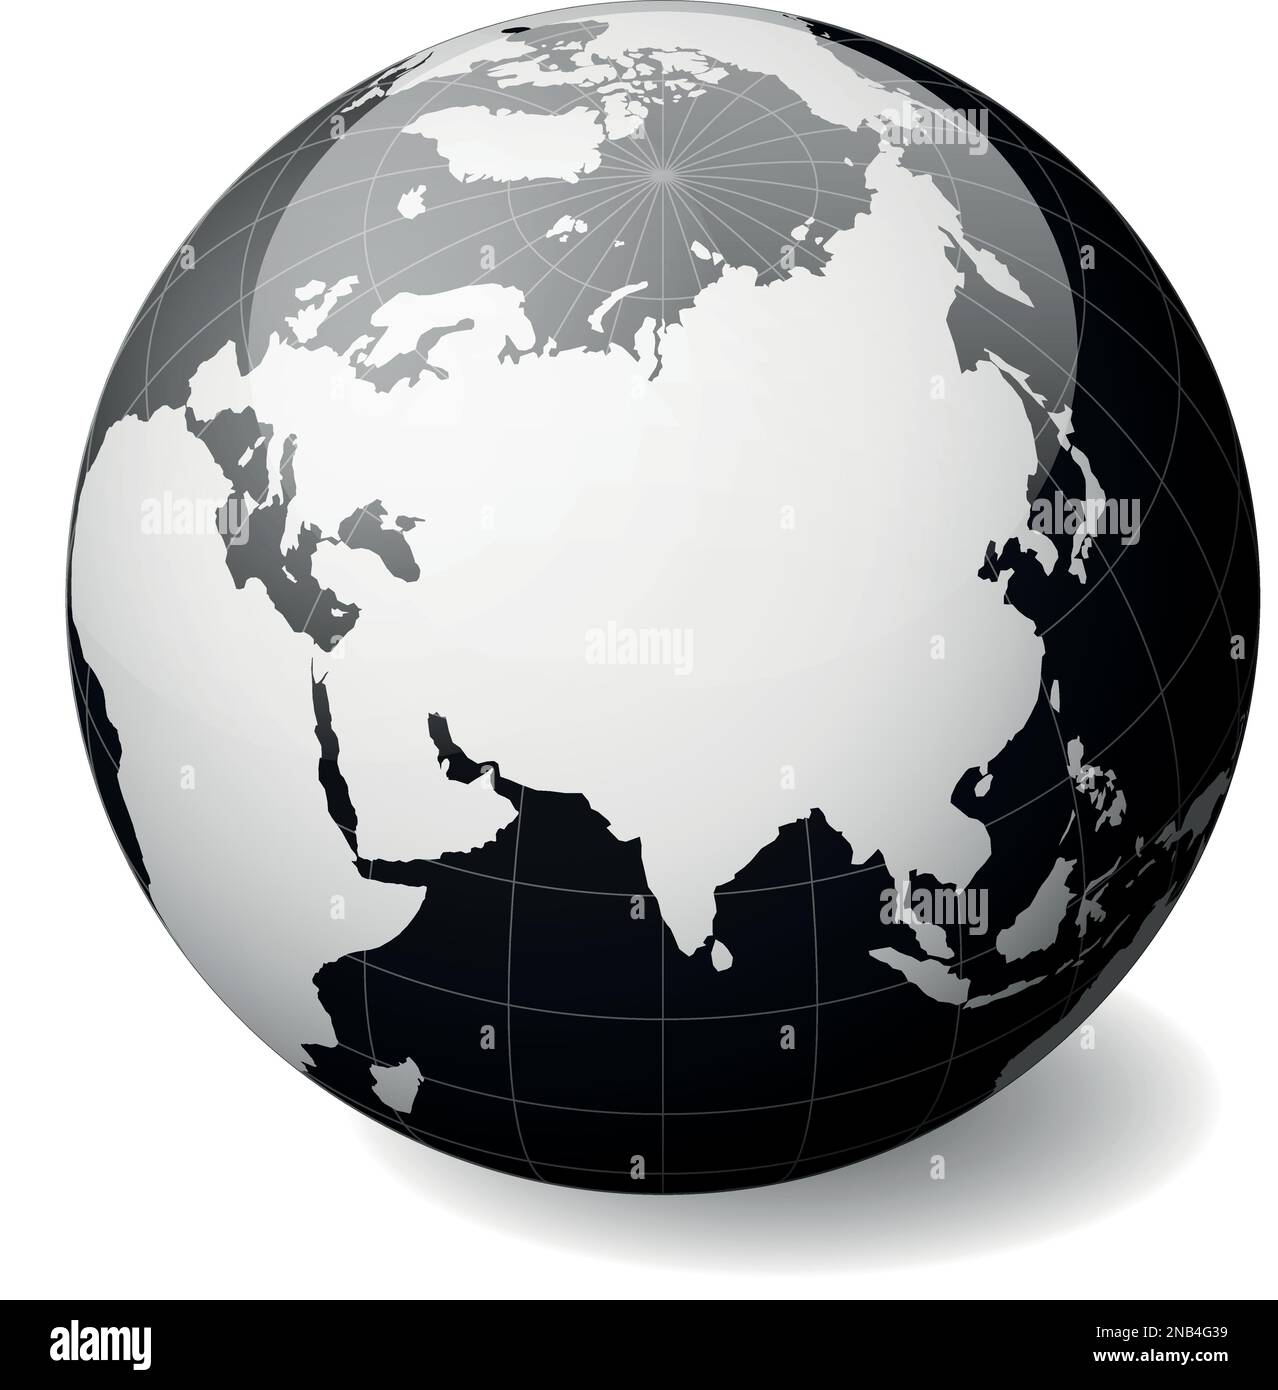 Black Earth globe focused on Asia. With thin white meridians and parallels. 3D glossy sphere vector illustration. Stock Vector